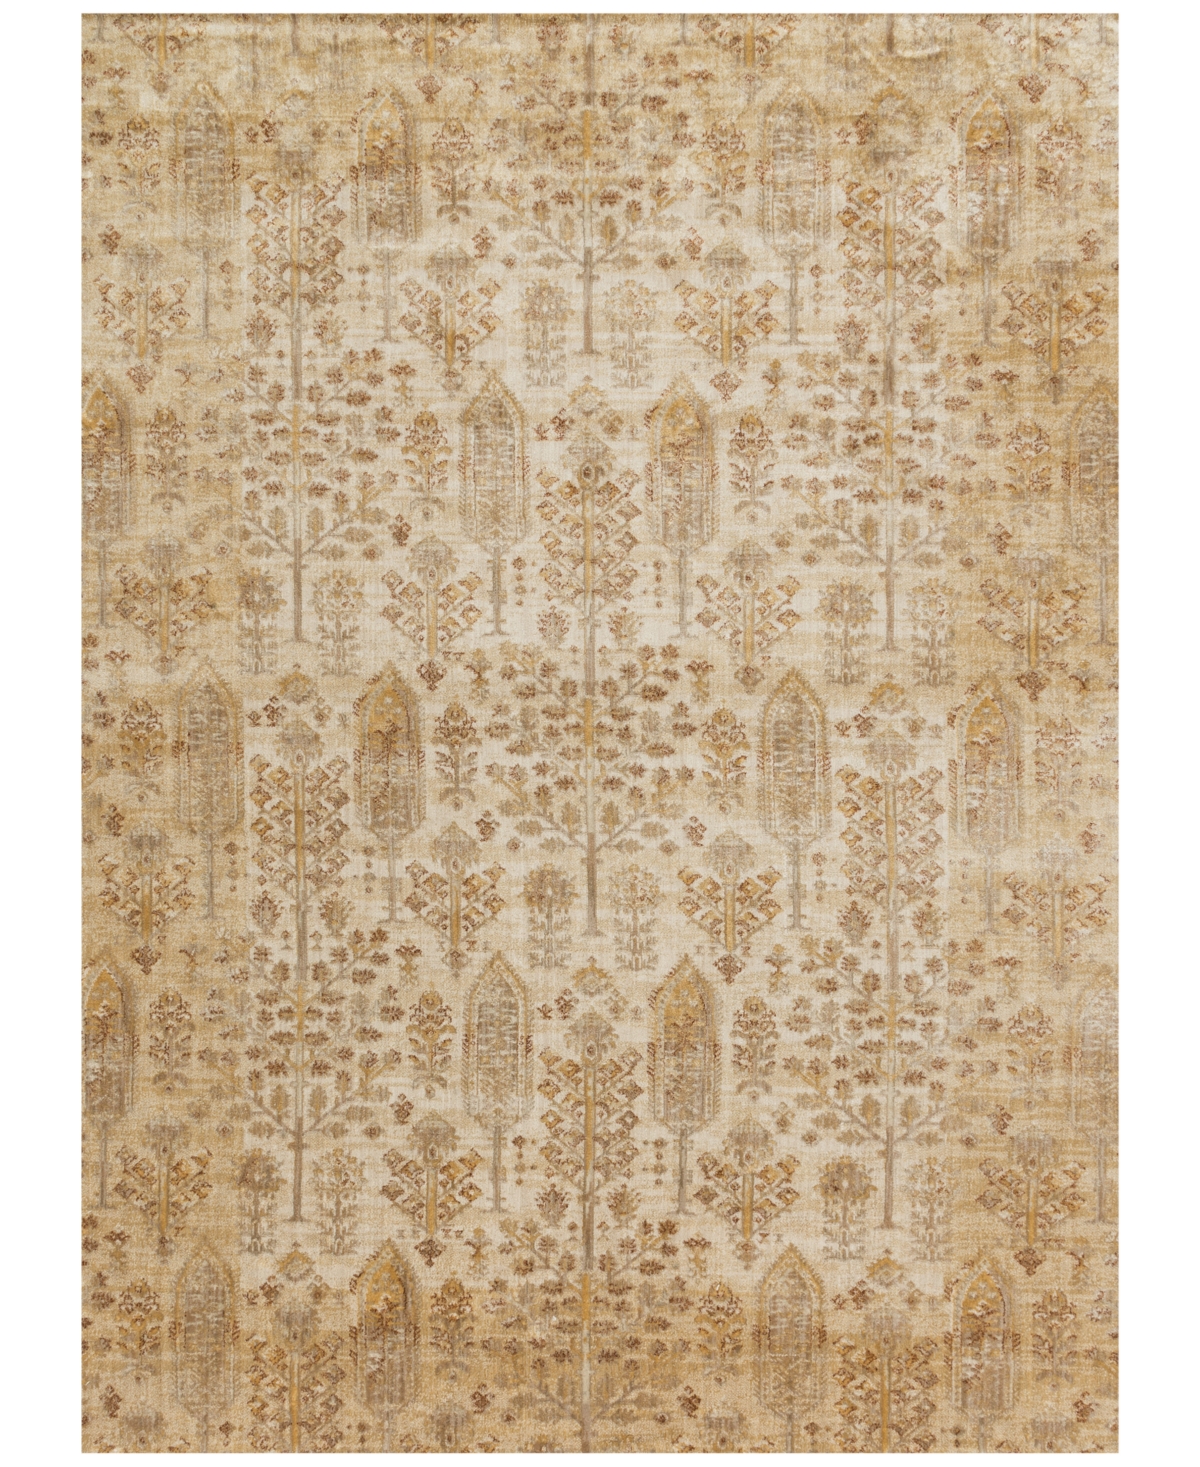 Loloi Anastasia Af-11 Antique Ivory 3'7in x 5'7in Area Rug - Ivory